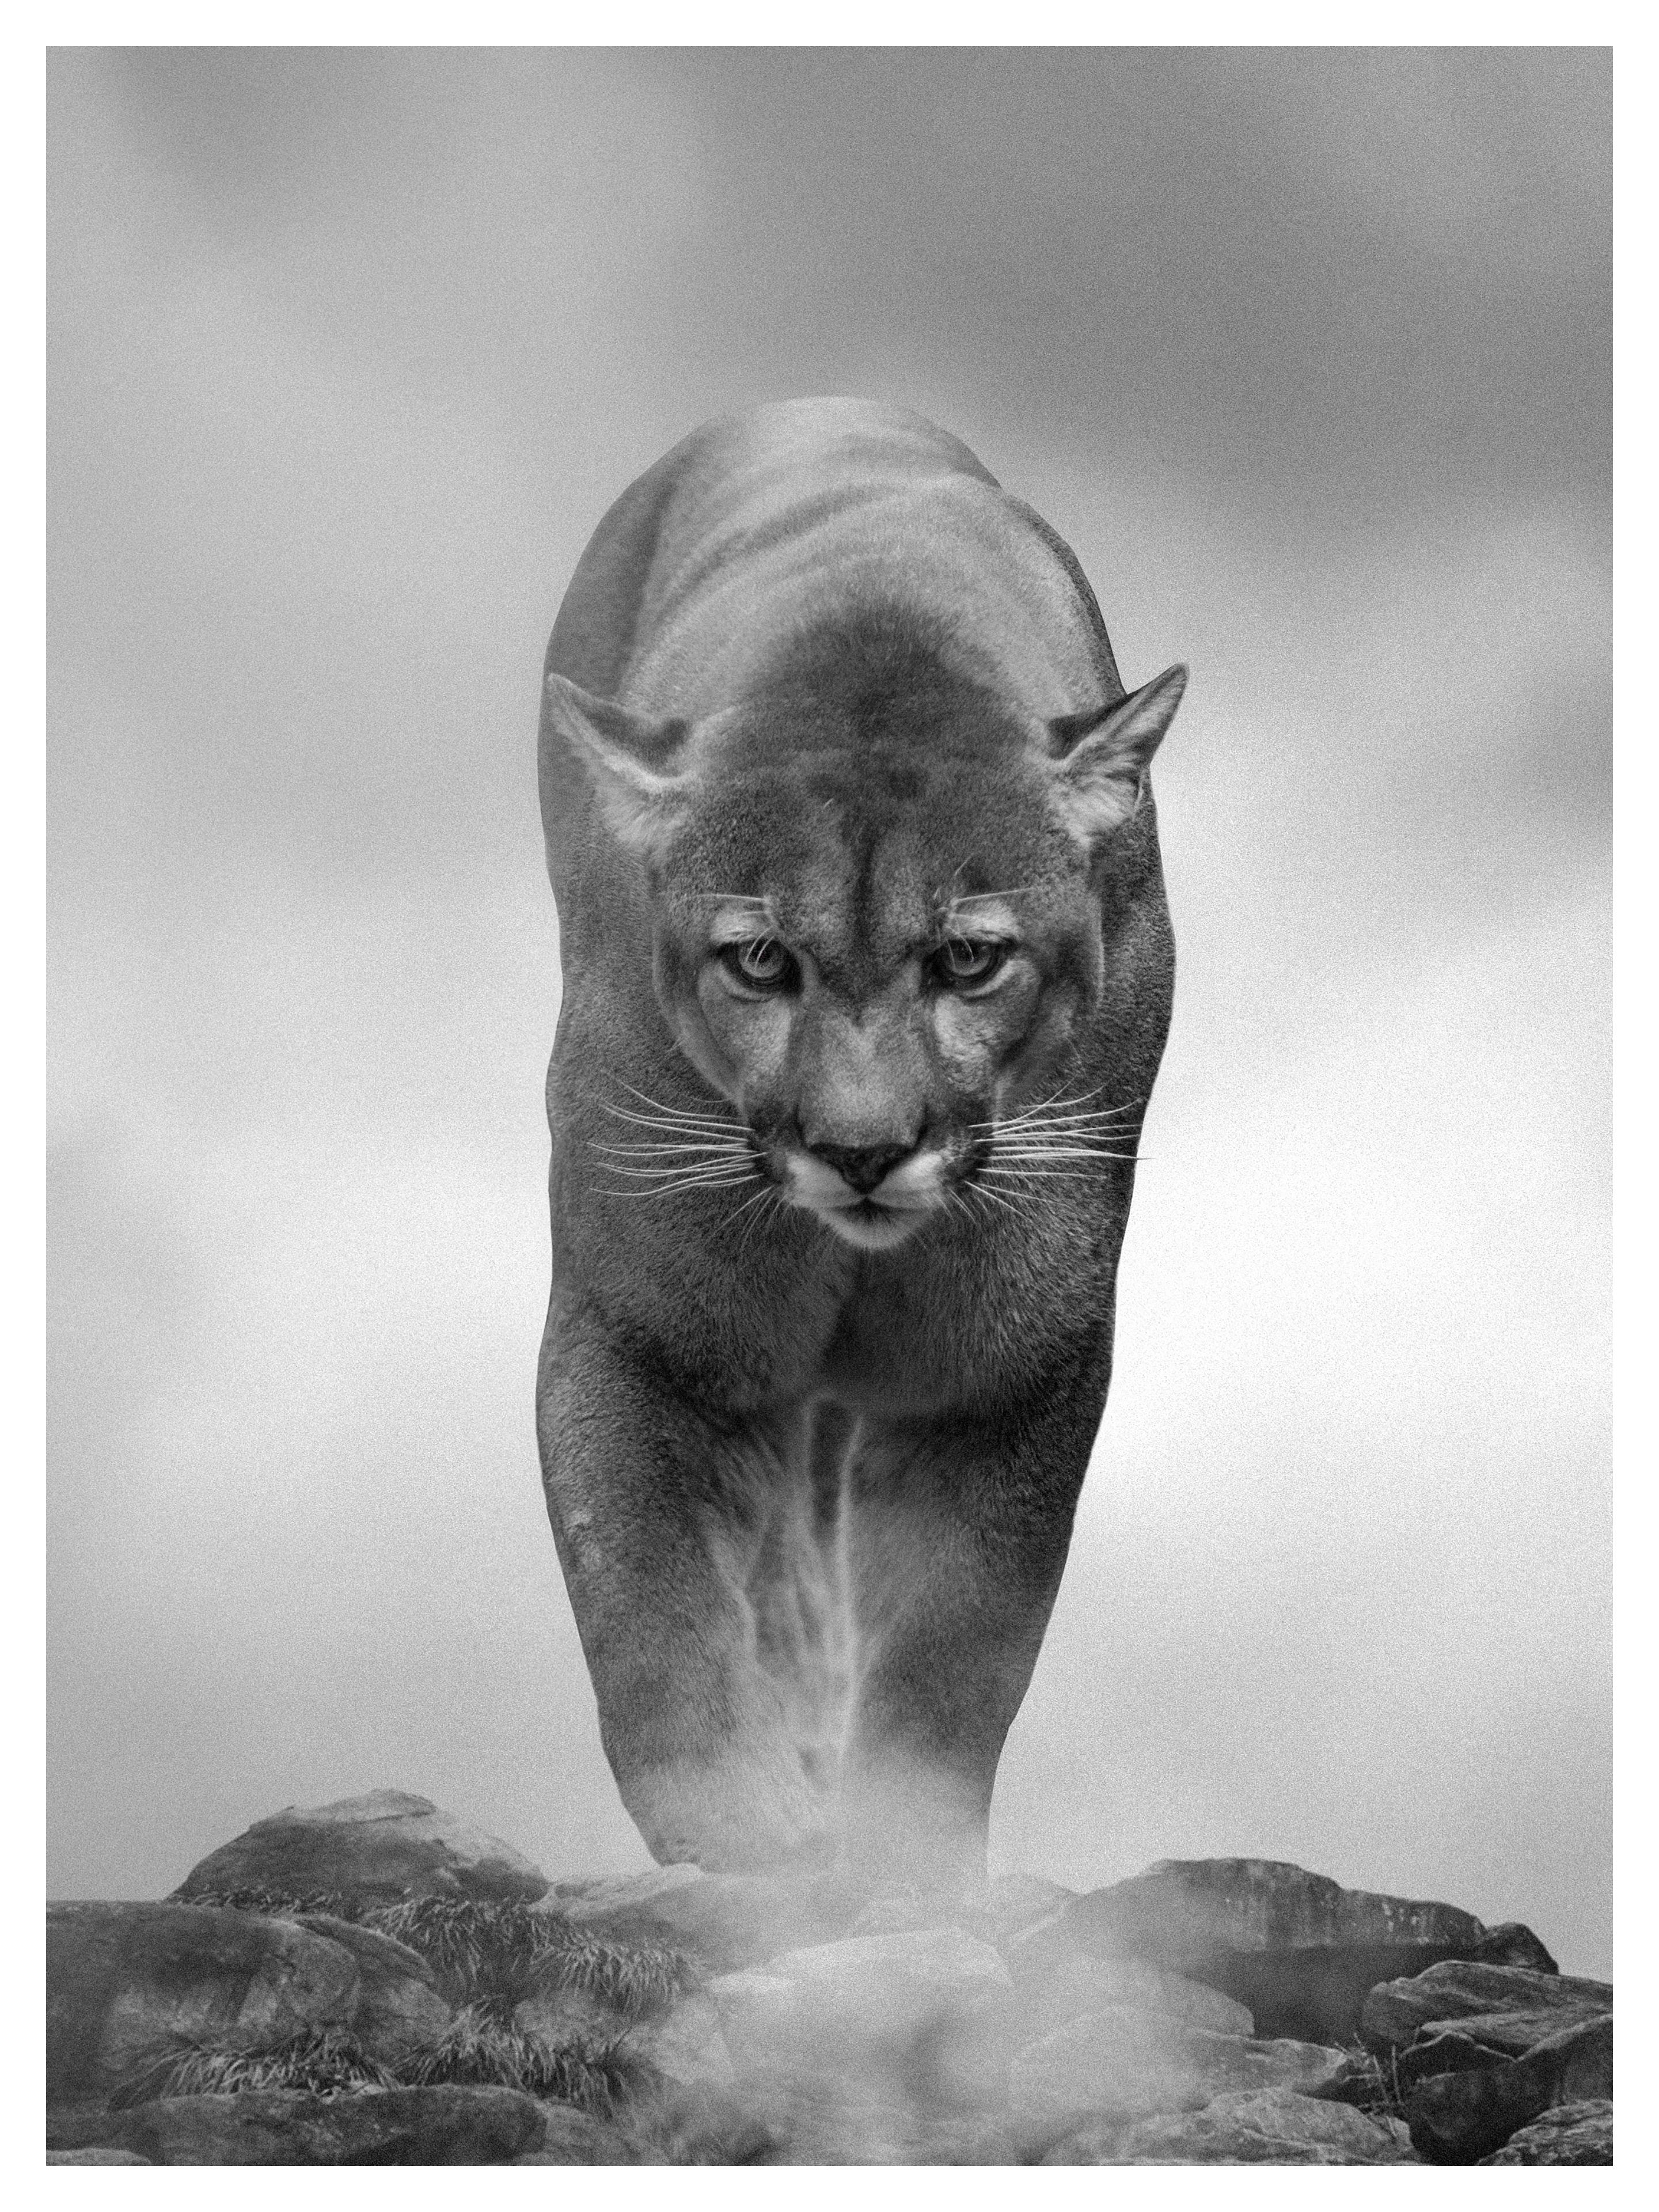 Shane Russeck Black and White Photograph - King of the Mountain  36x48 B&W Unsigned Test Print, Cougar, Mountain Lion, Puma